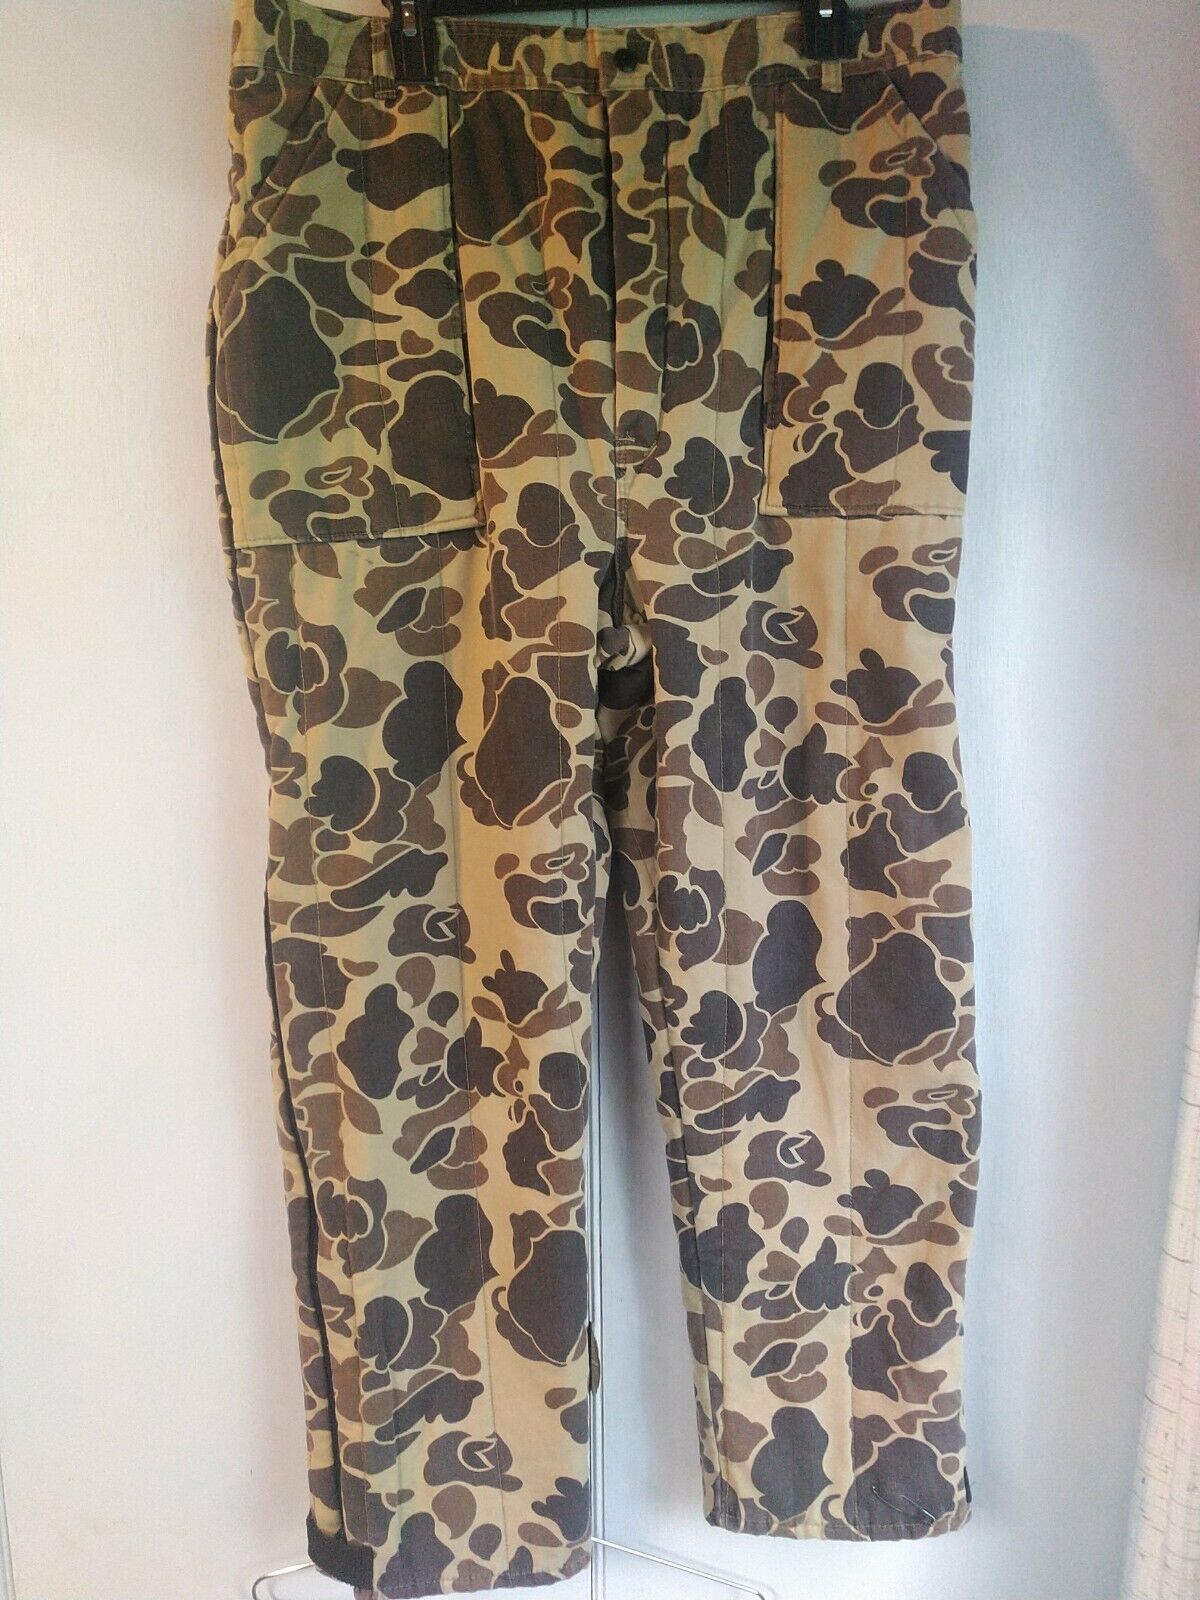 VTG Sports Afield Camo Duck Hunting Pants LARGE REG Insulated Full zipper sides